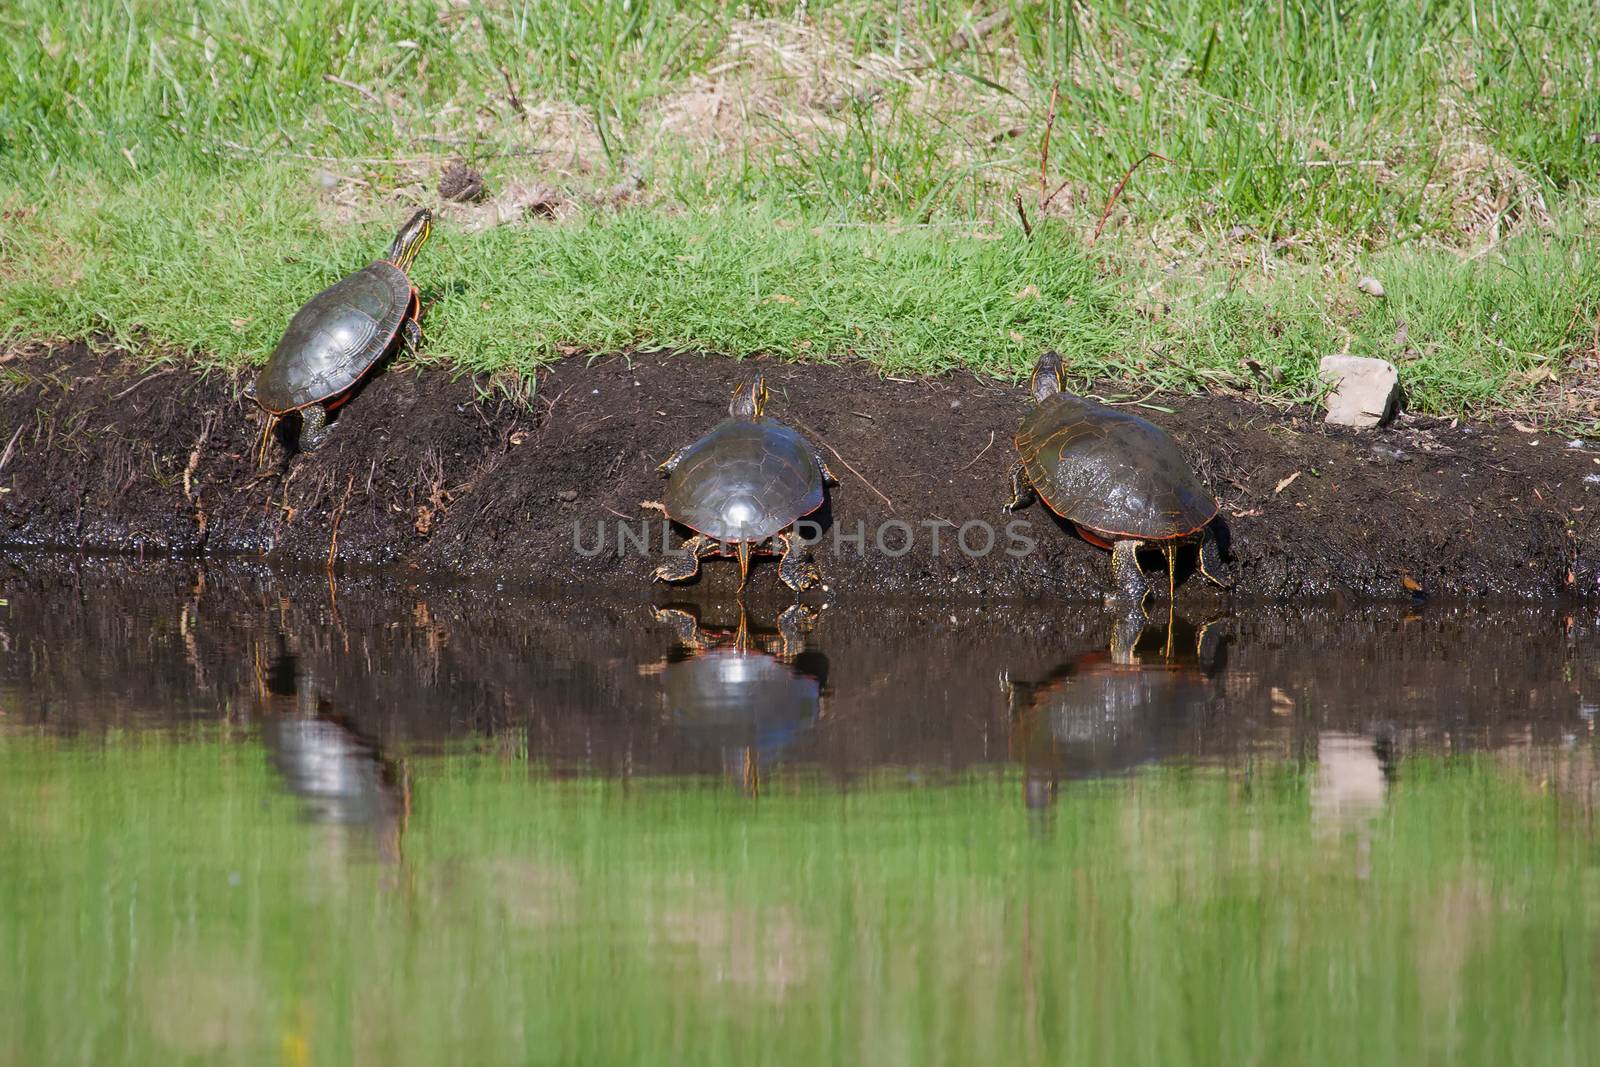 Painted Turtles came out of the water to get some sun.